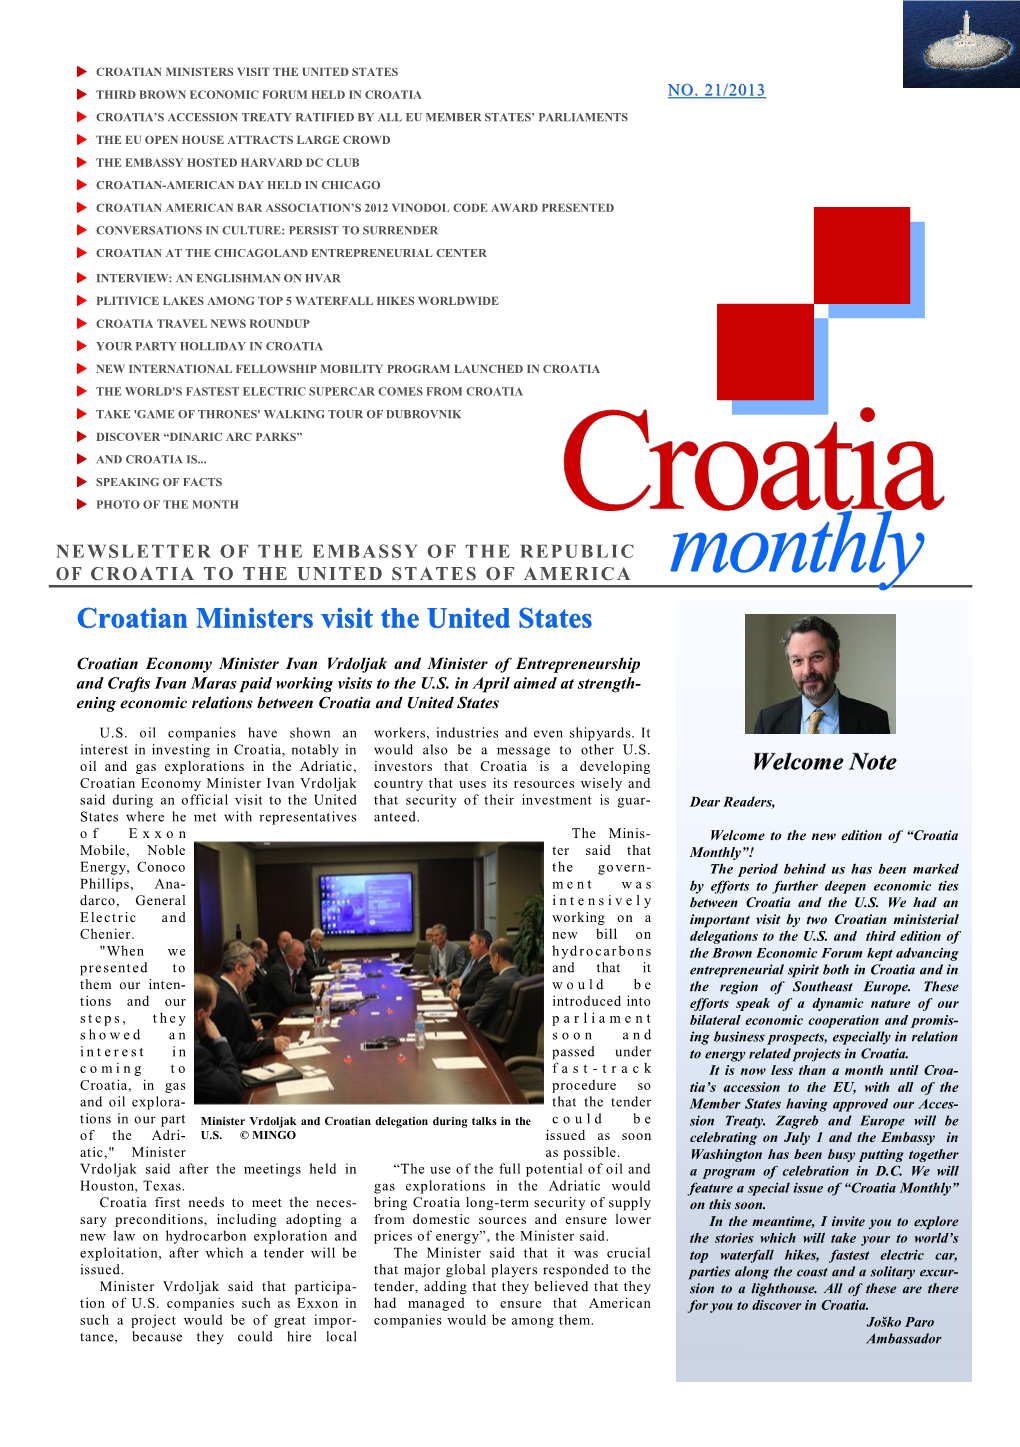 Croatian Ministers Visit the United States